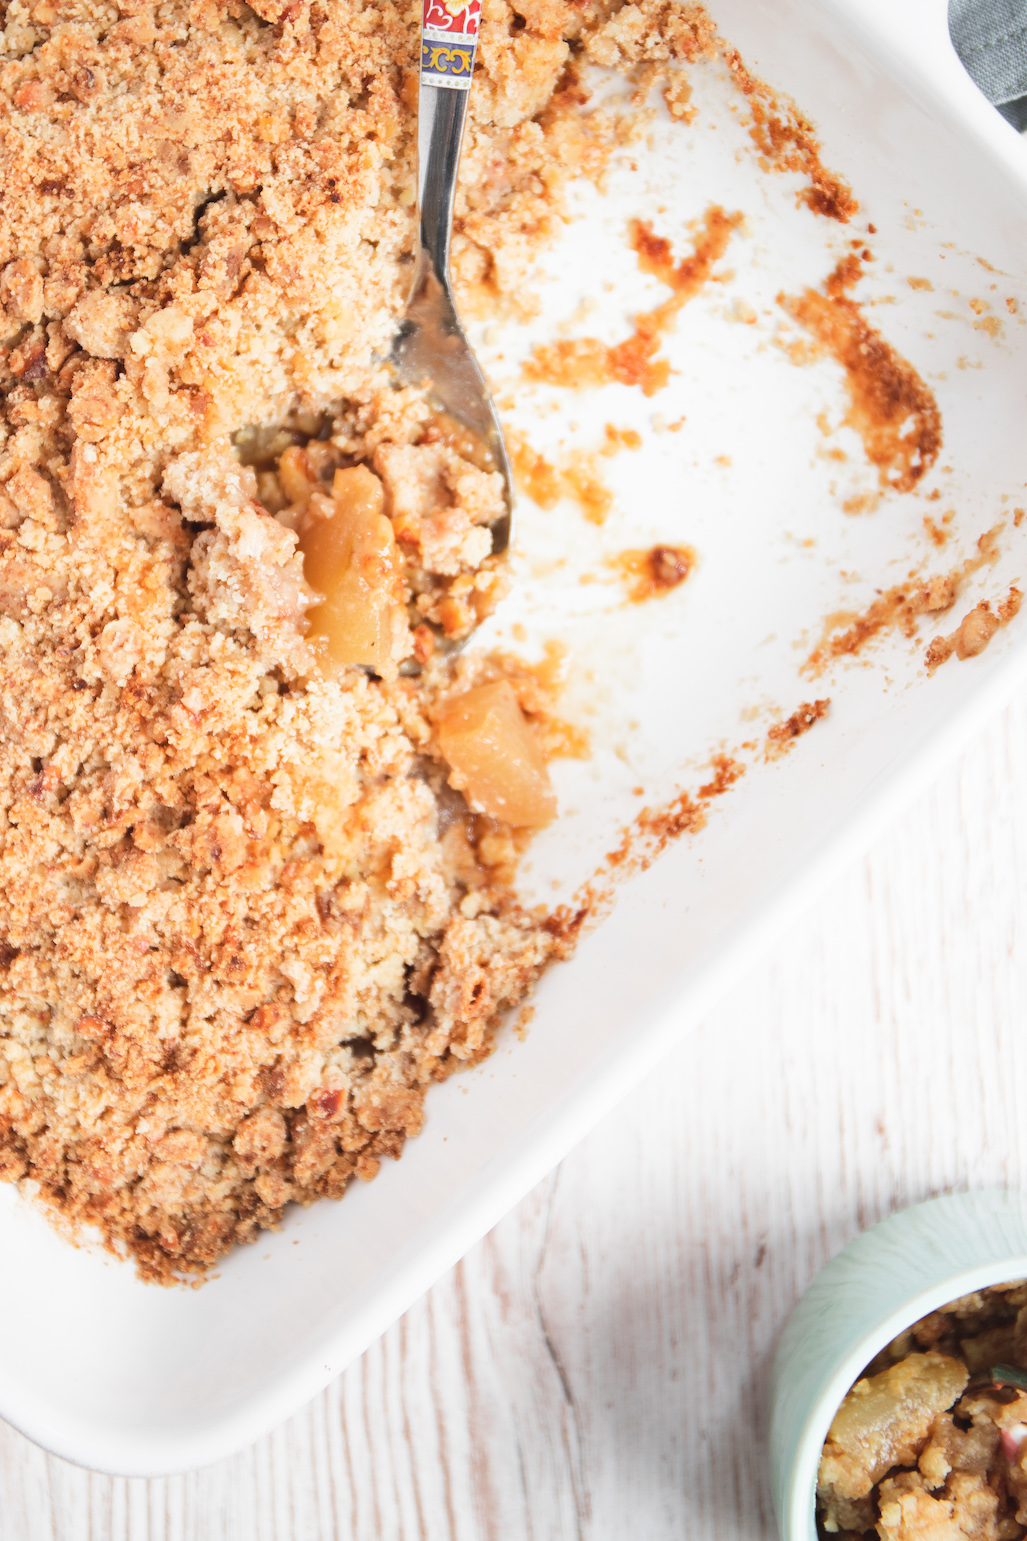 Apple and Pear Crumble